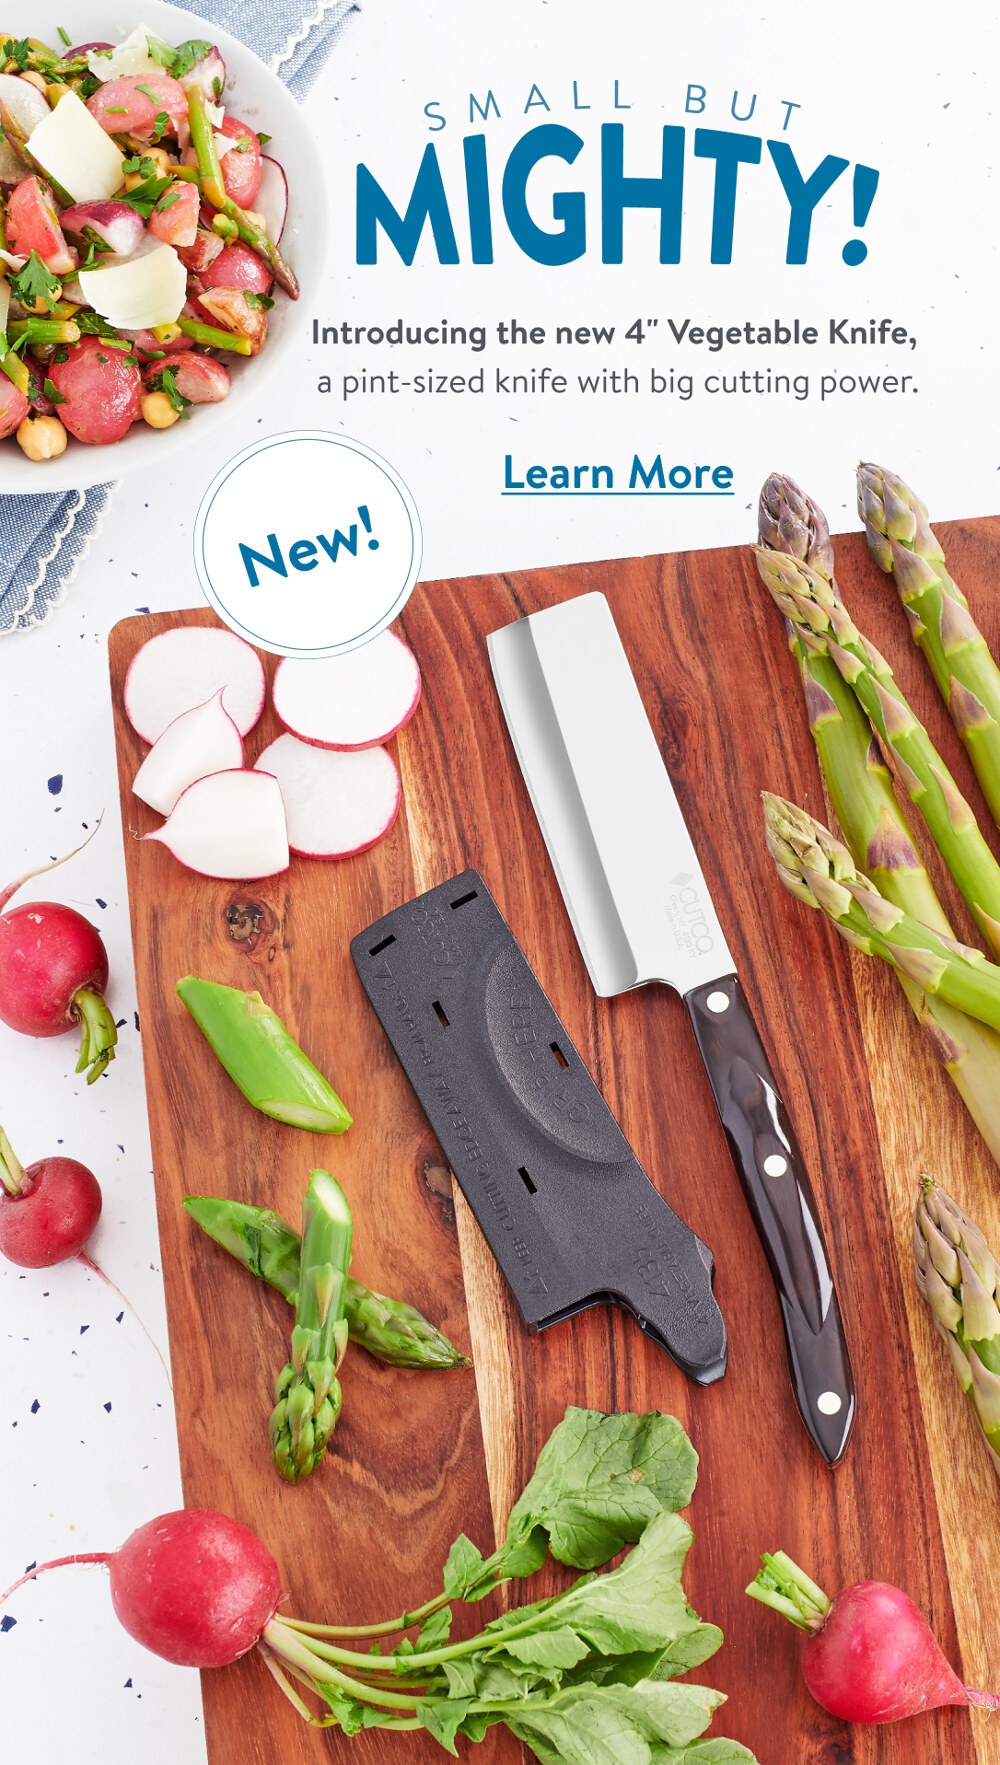 Introducing the NEW 4-Inch Vegetable Knife